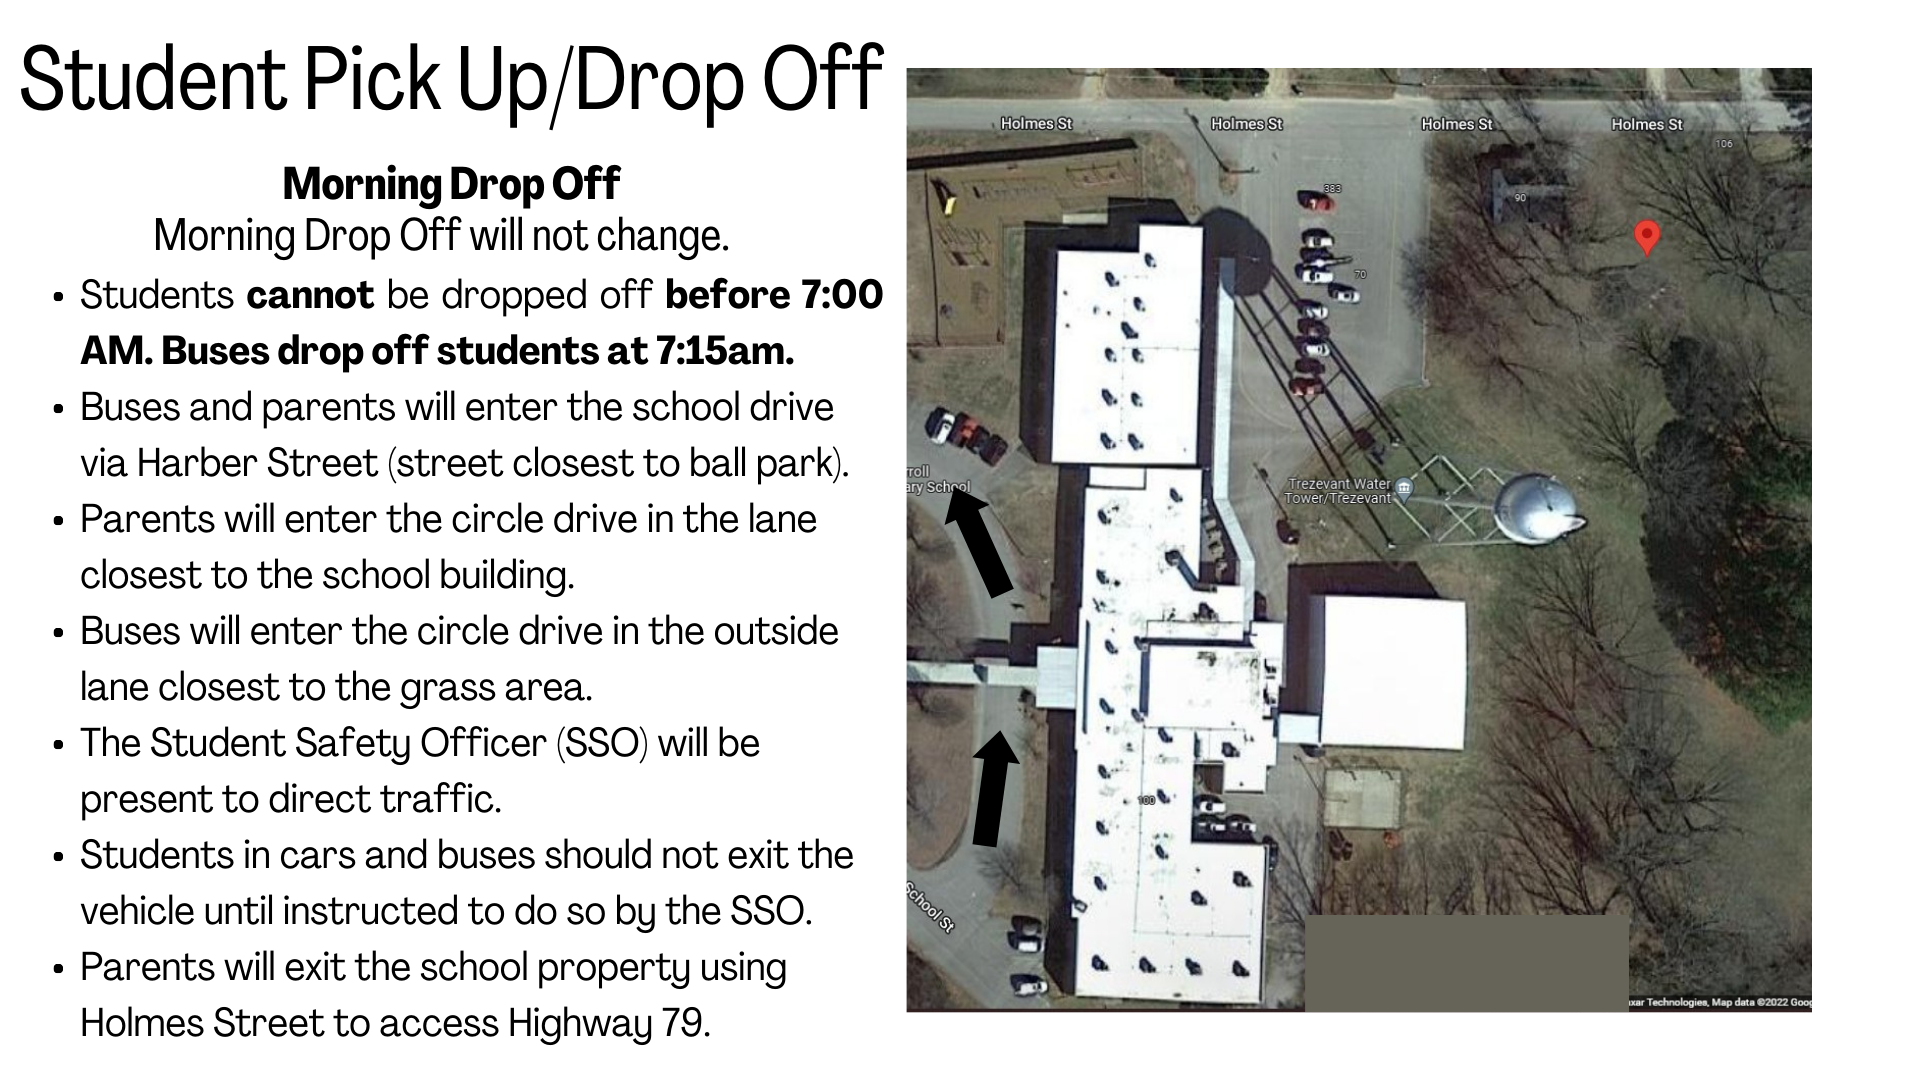 drop off procedure - route and one way street notification